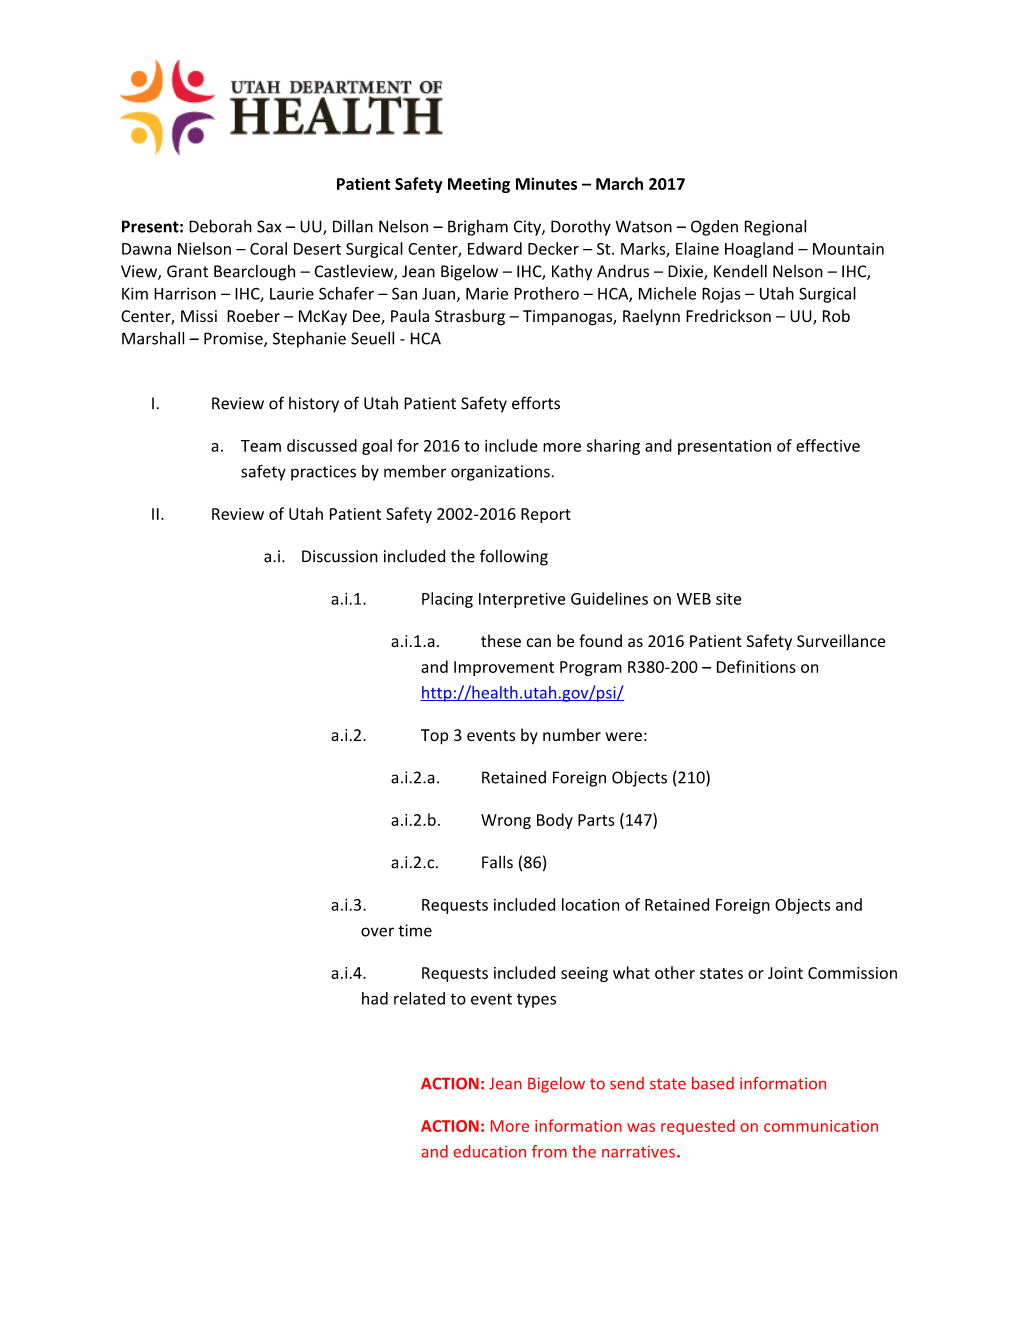 Patient Safety Meeting Minutes March 2017